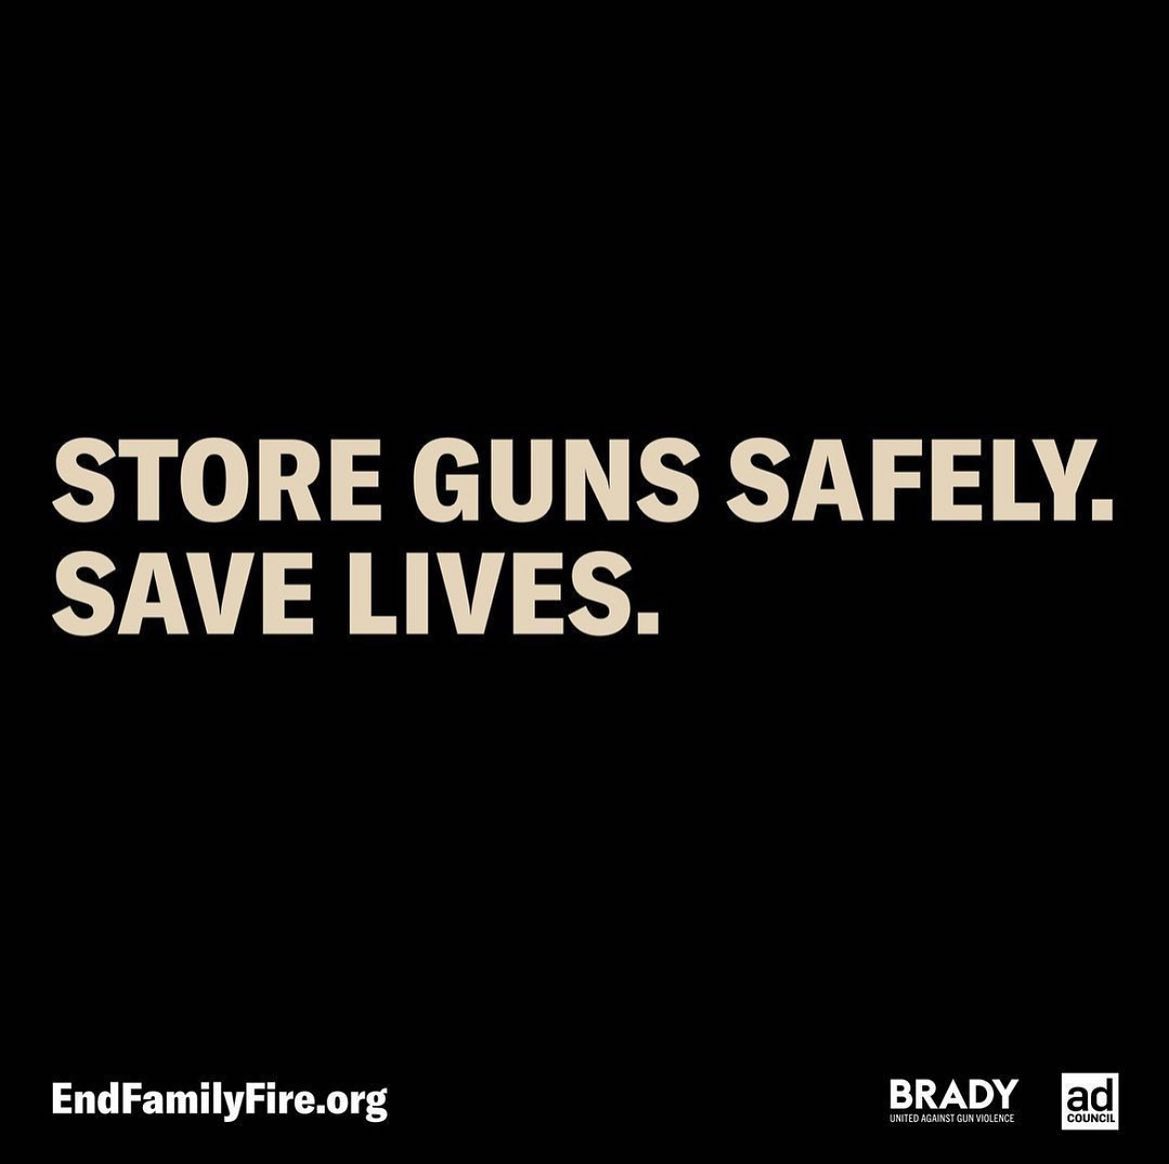 4.6 million kids live in a home with an unlocked and loaded gun. It is important for responsible gun owners to ensure their firearms are: ✅ Locked in a safe ✅ Unloaded ✅ Stored separately from ammunition Learn more about #safestorage solutions at endfamilyfire.org.